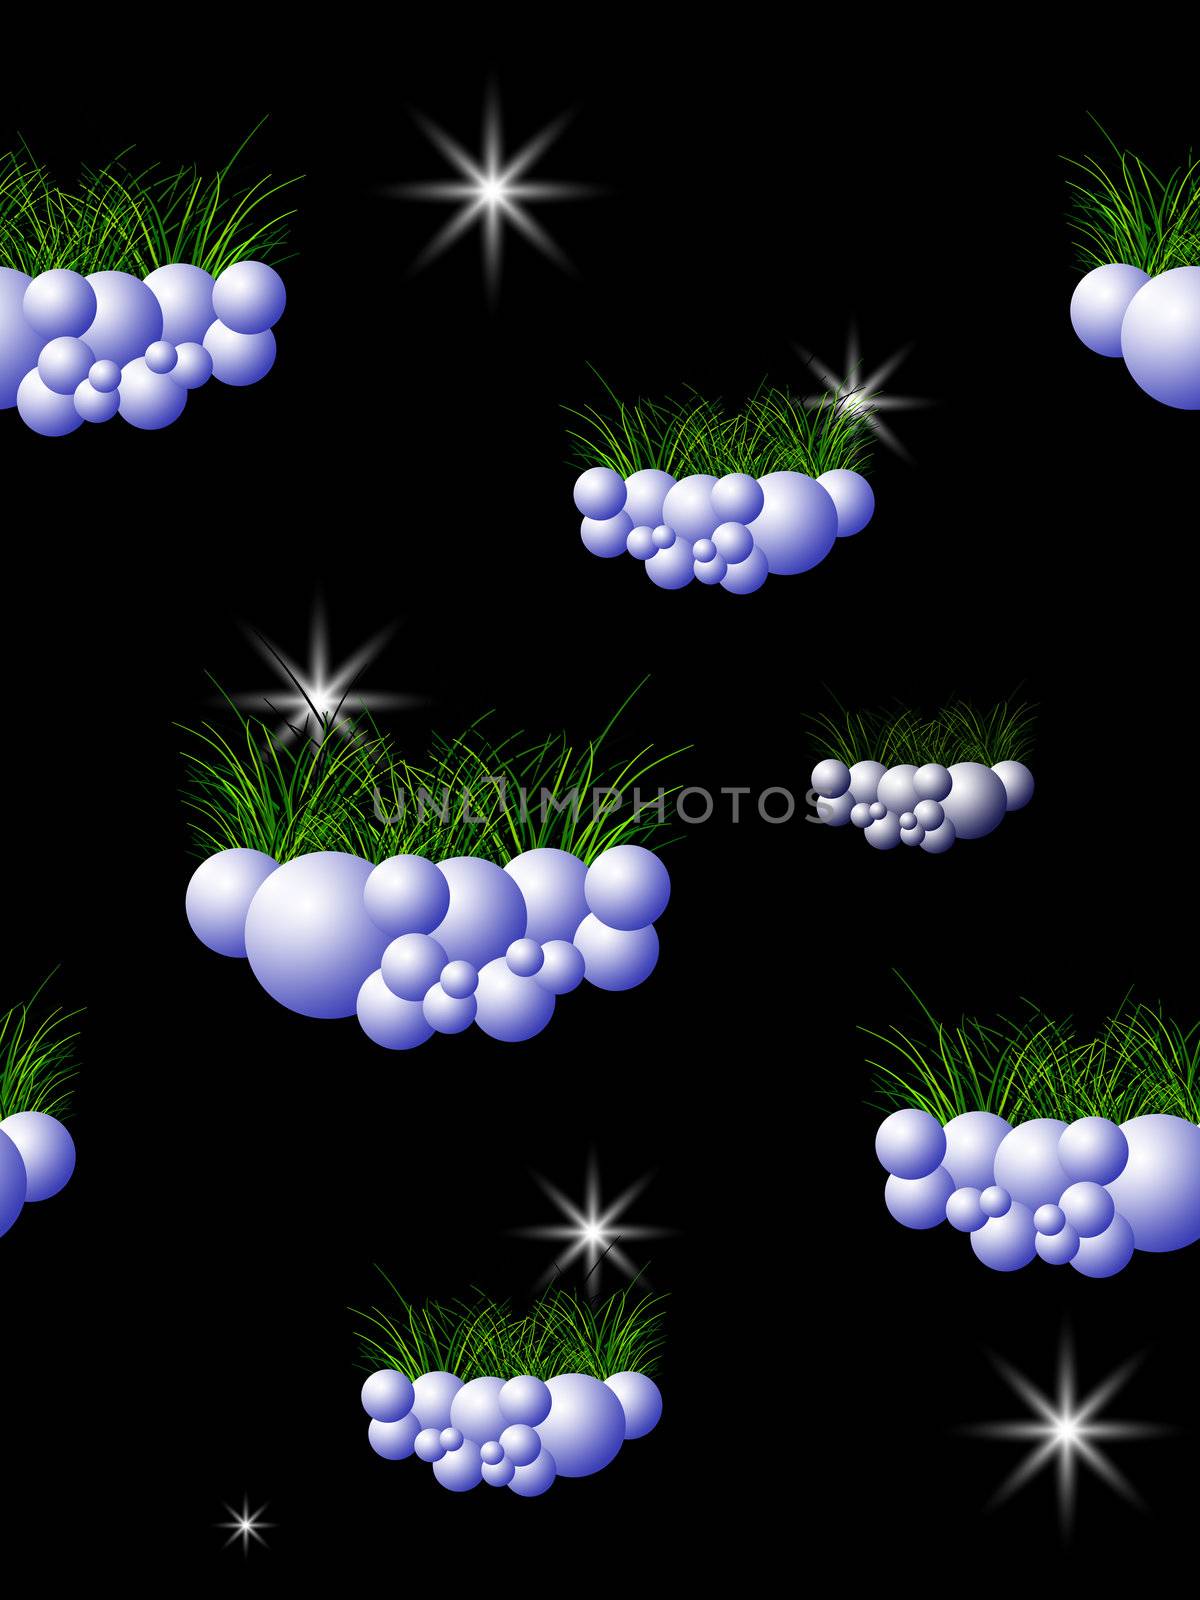 clouds and grass pattern by robertosch